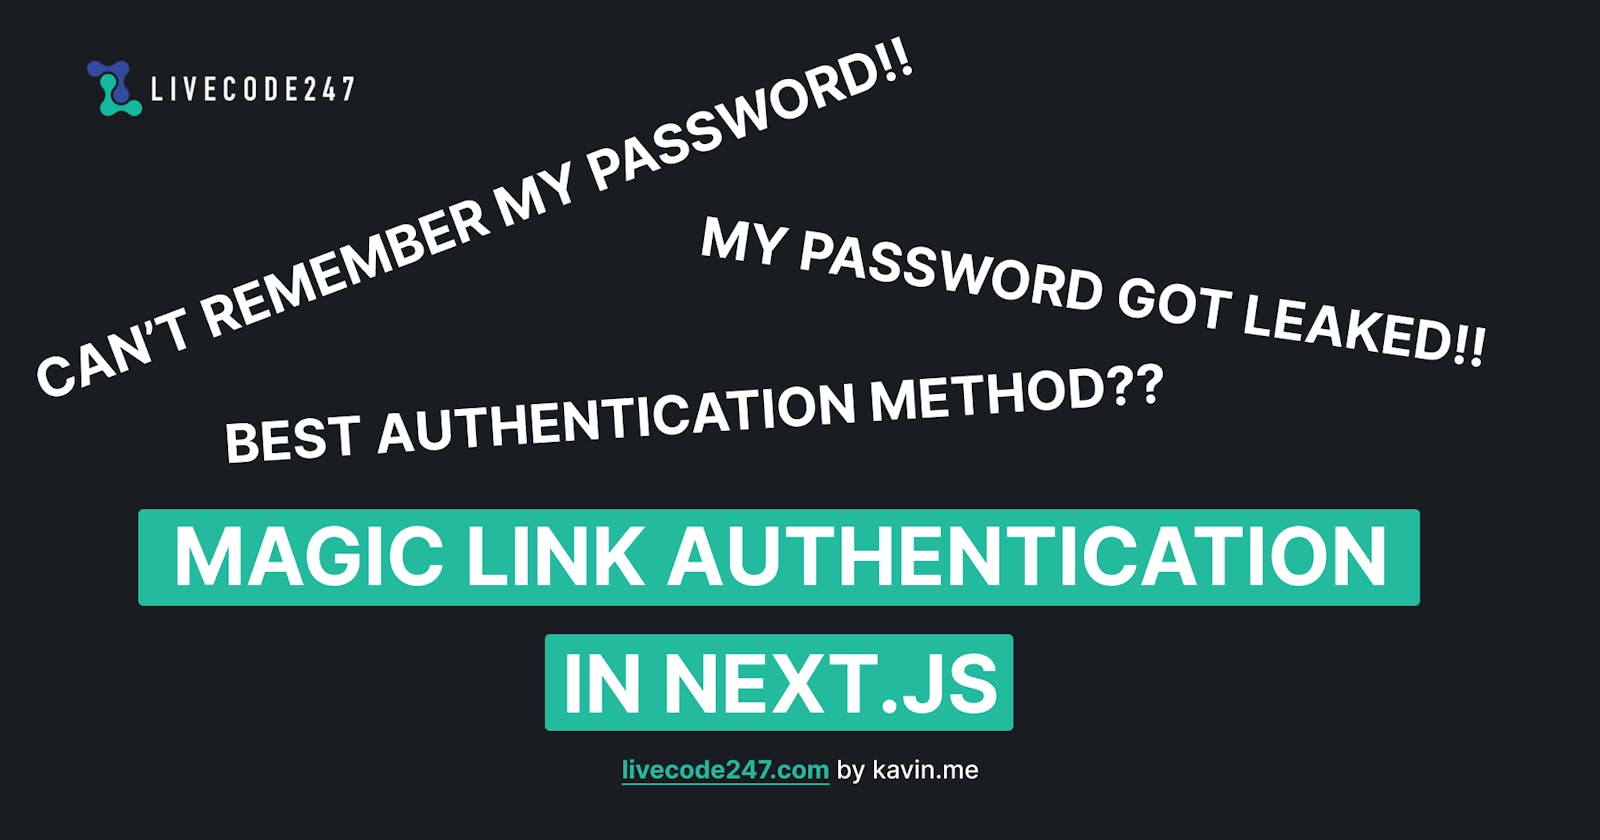 Try using this authentication method in your next NextJS project!! (Hint: Magic Links)